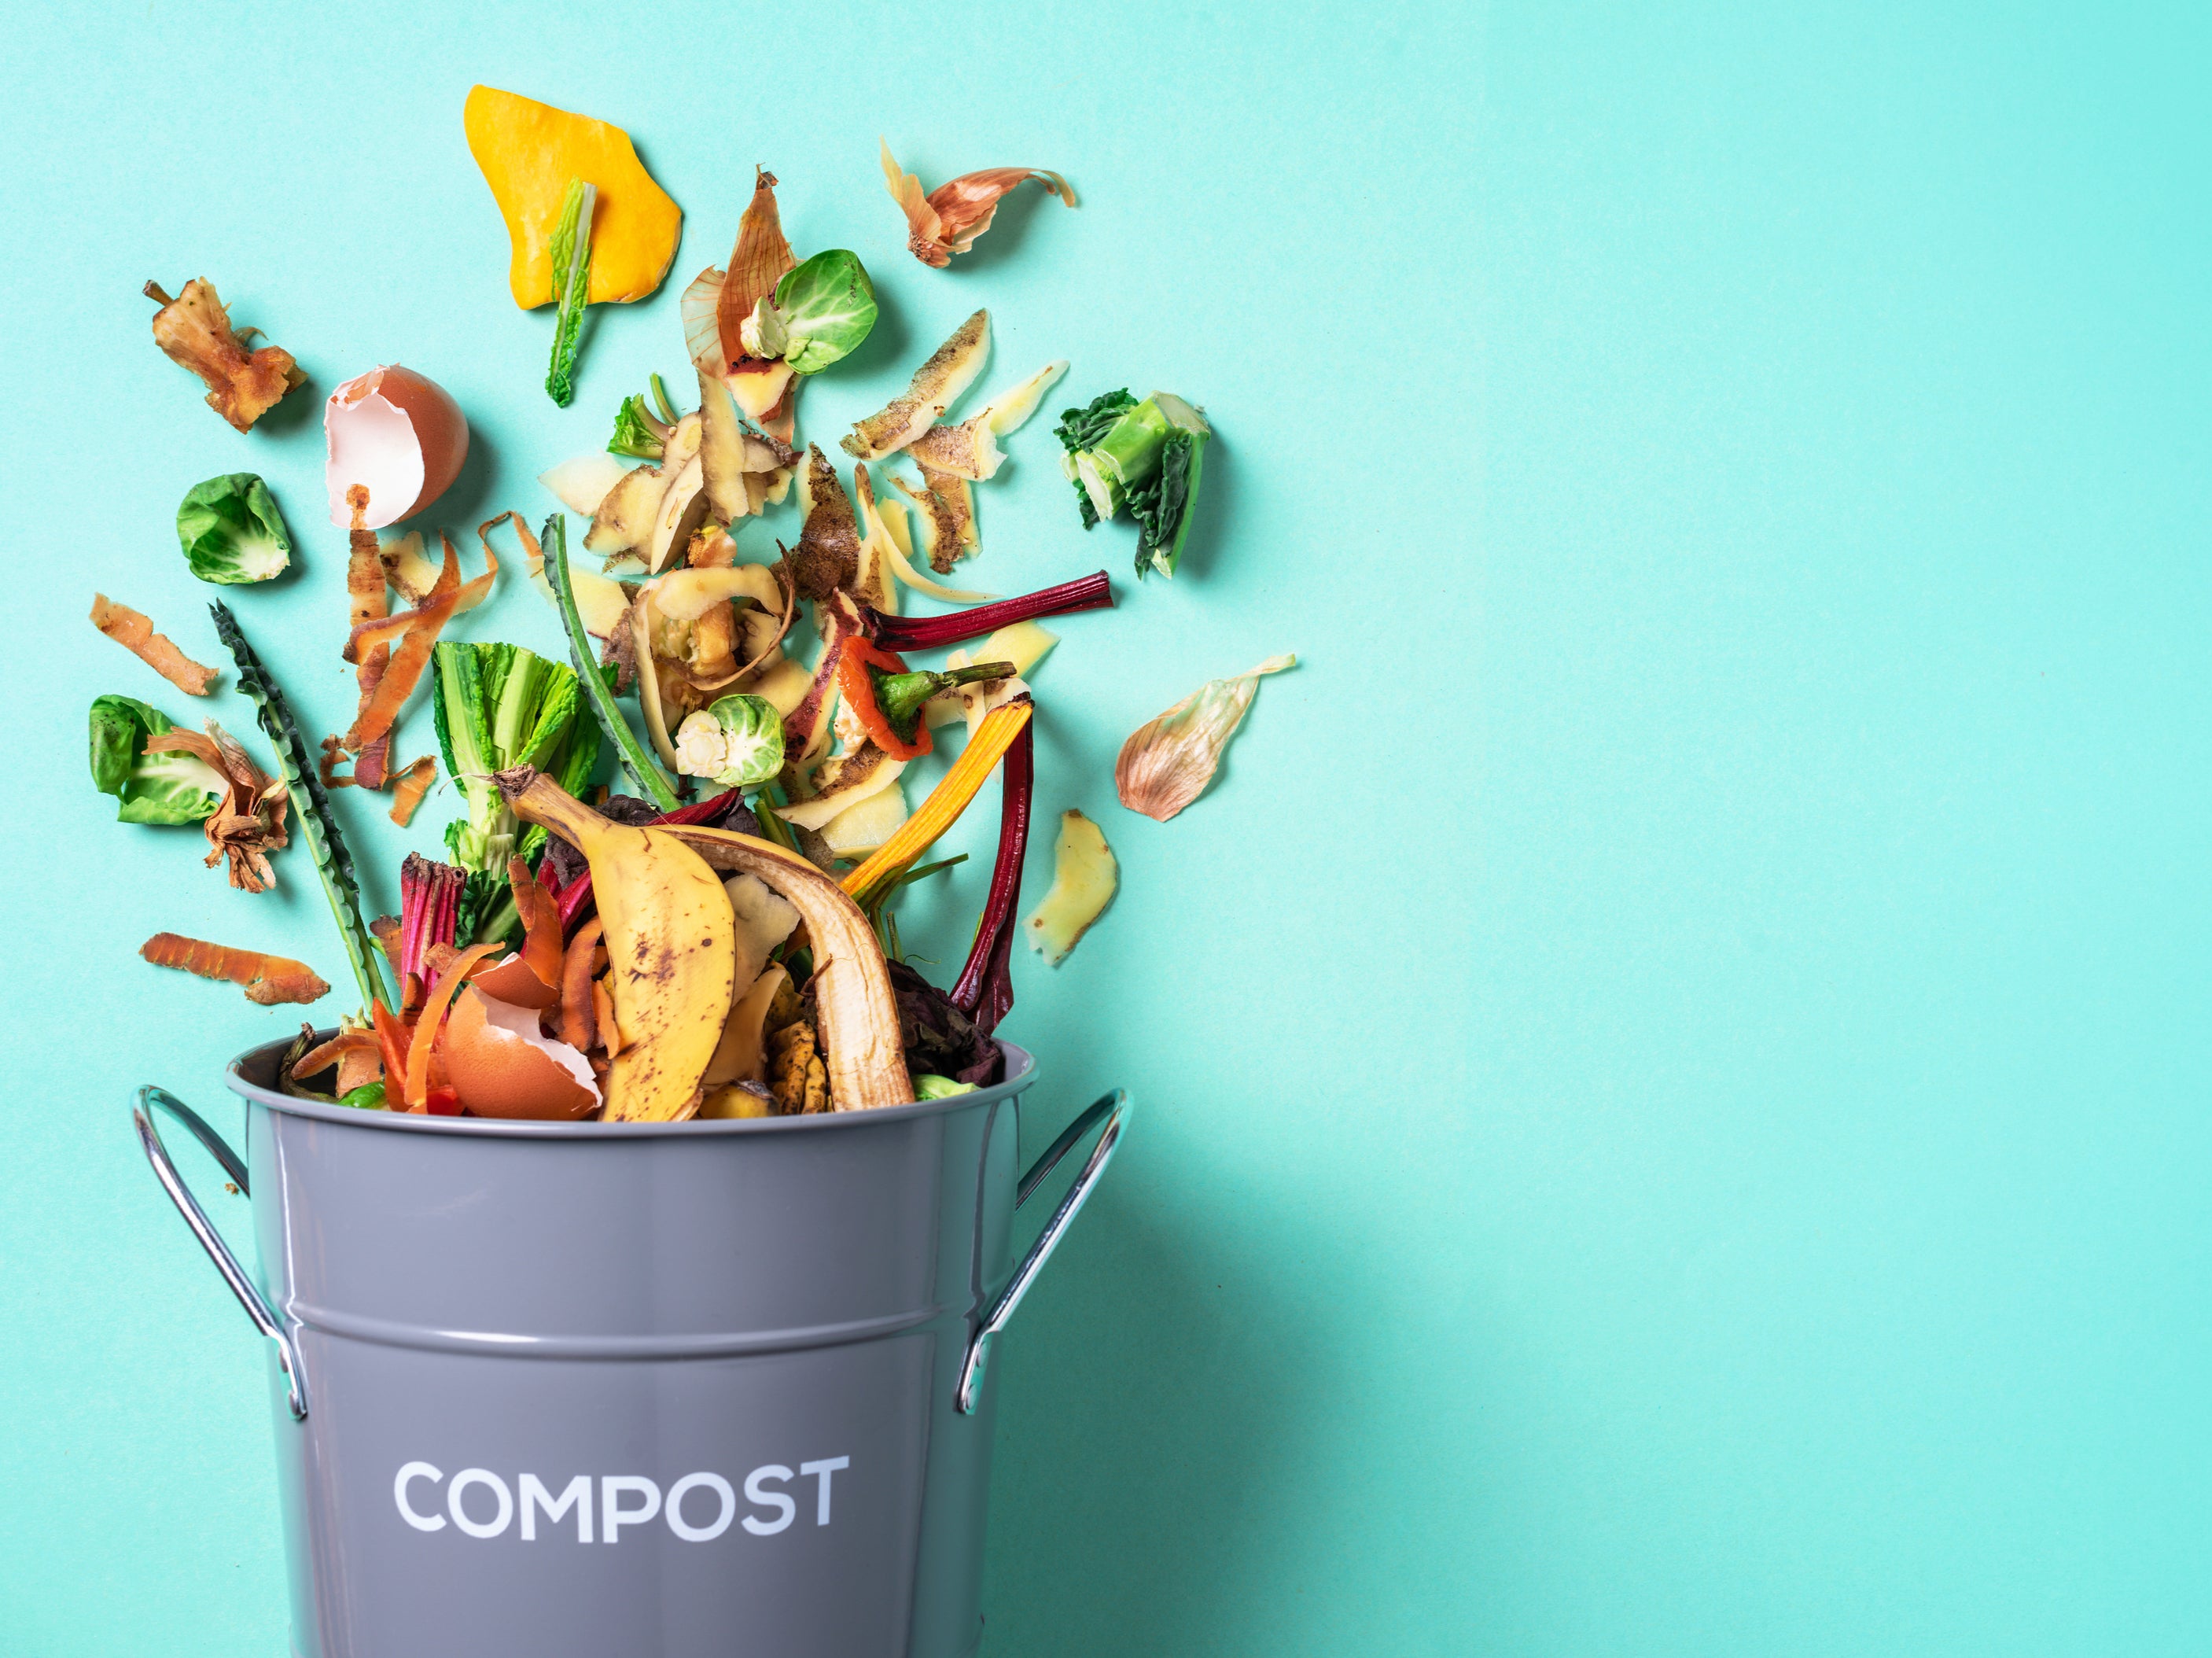 70 per cent of all food waste produced in the UK comes from our homes